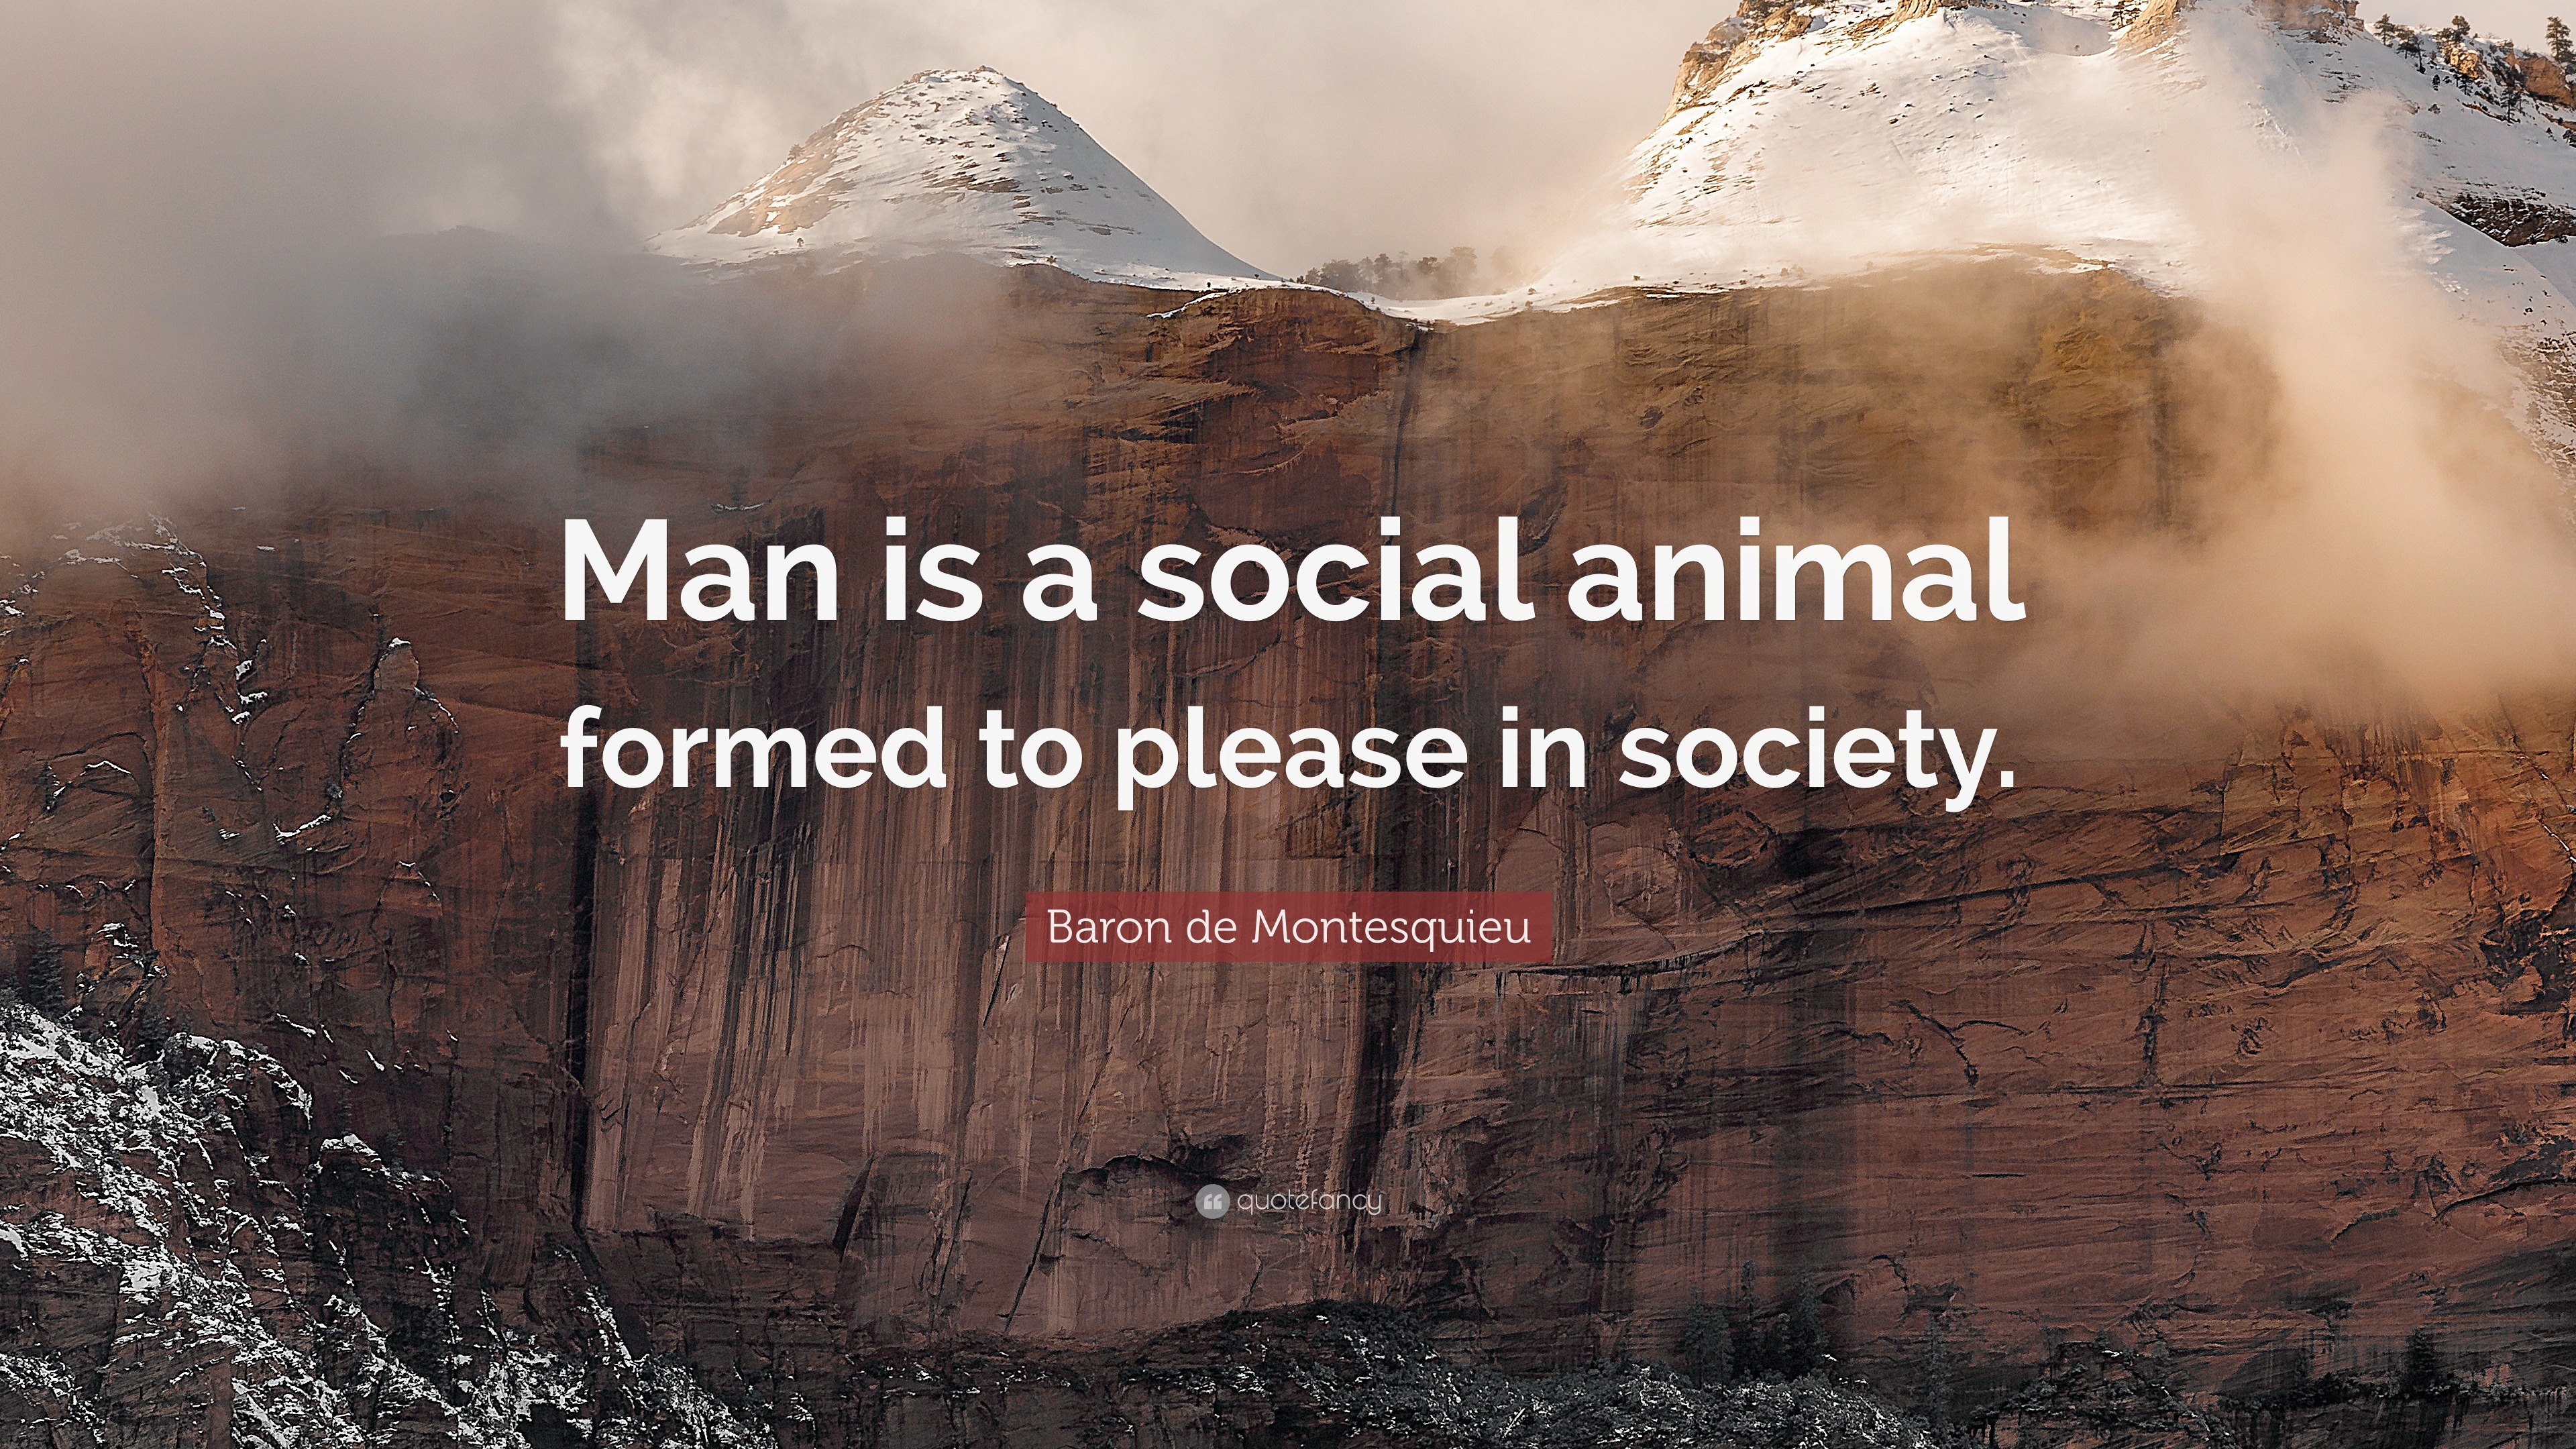 Baron de Montesquieu Quote: “Man is a social animal formed to please in  society.”